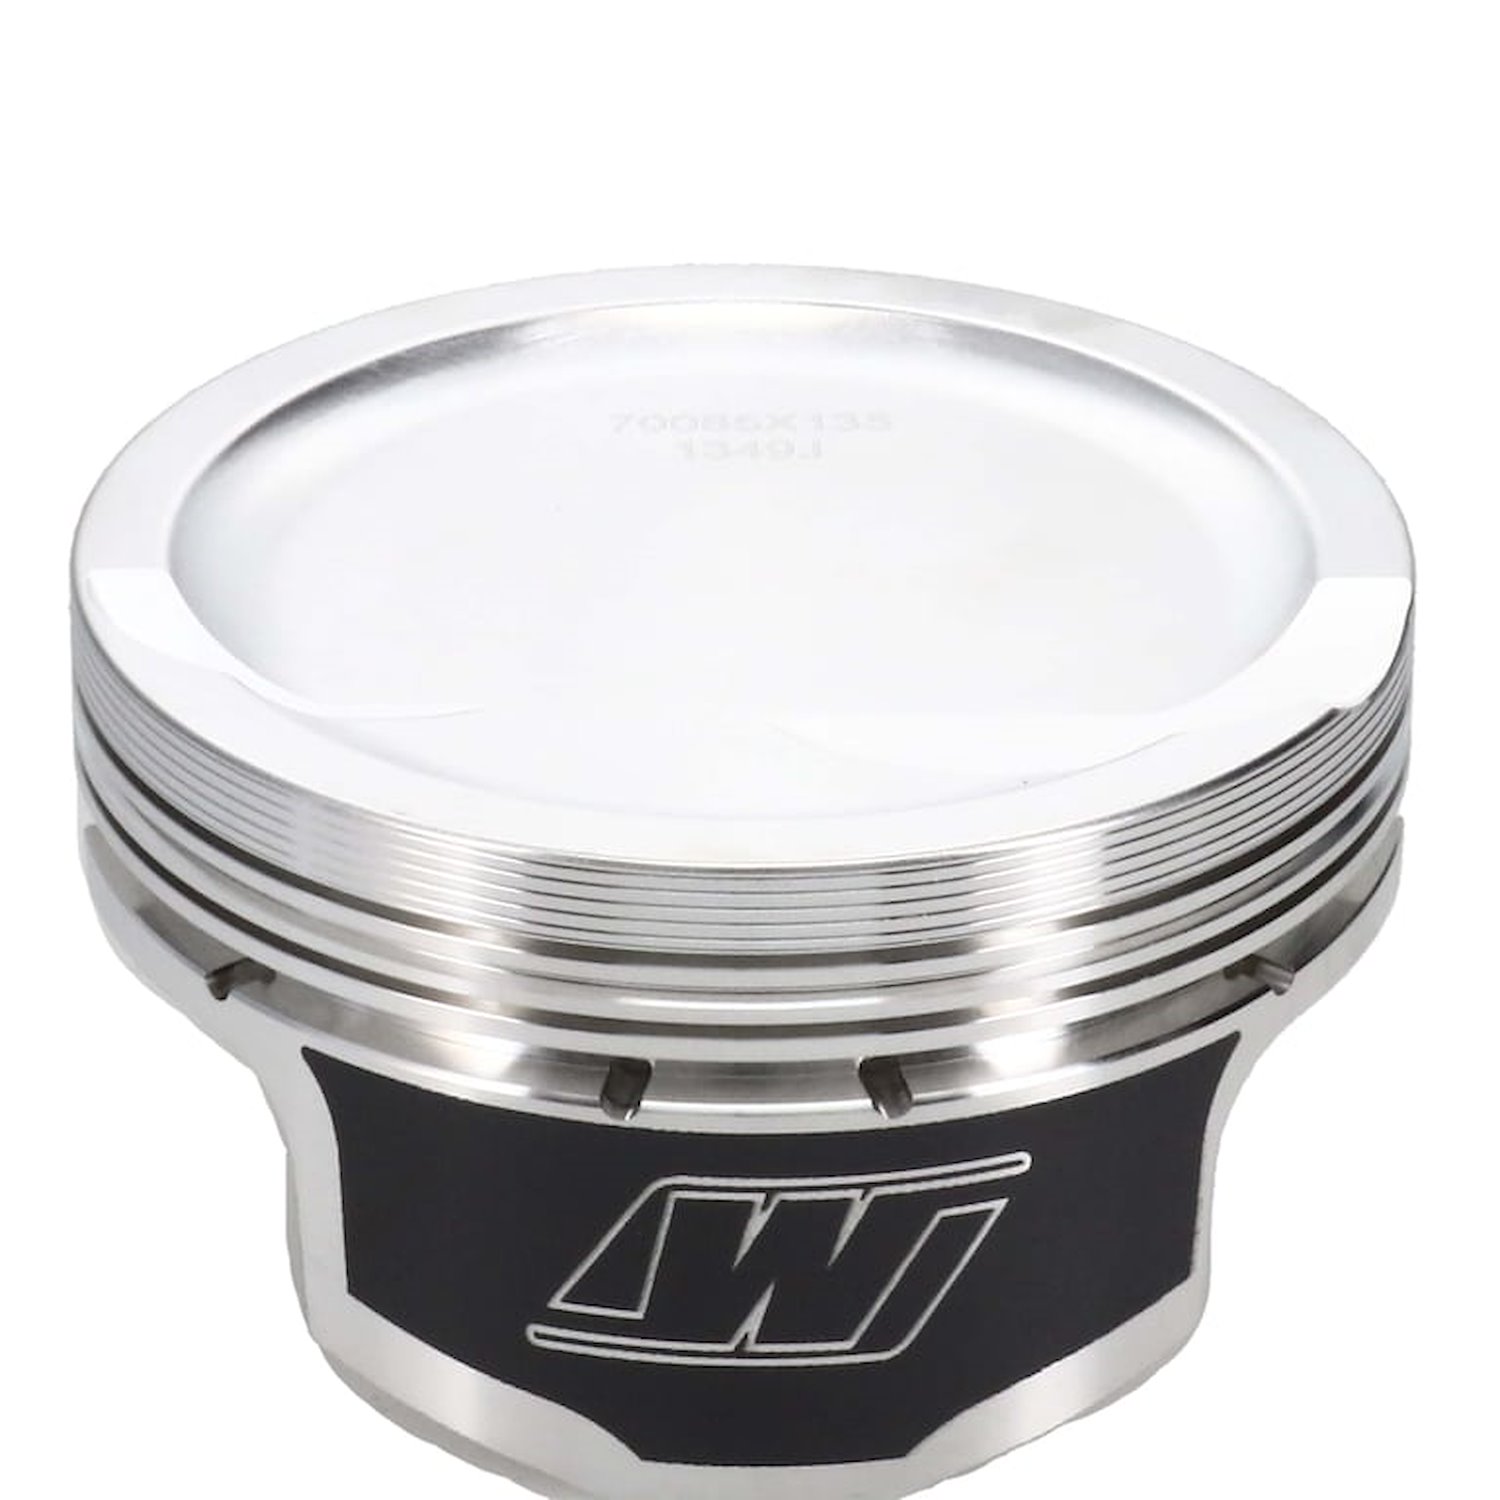 RED0085X135 RED-Series Piston Set, Chevy LS, 4.135 in. Bore, -20 cc Dish